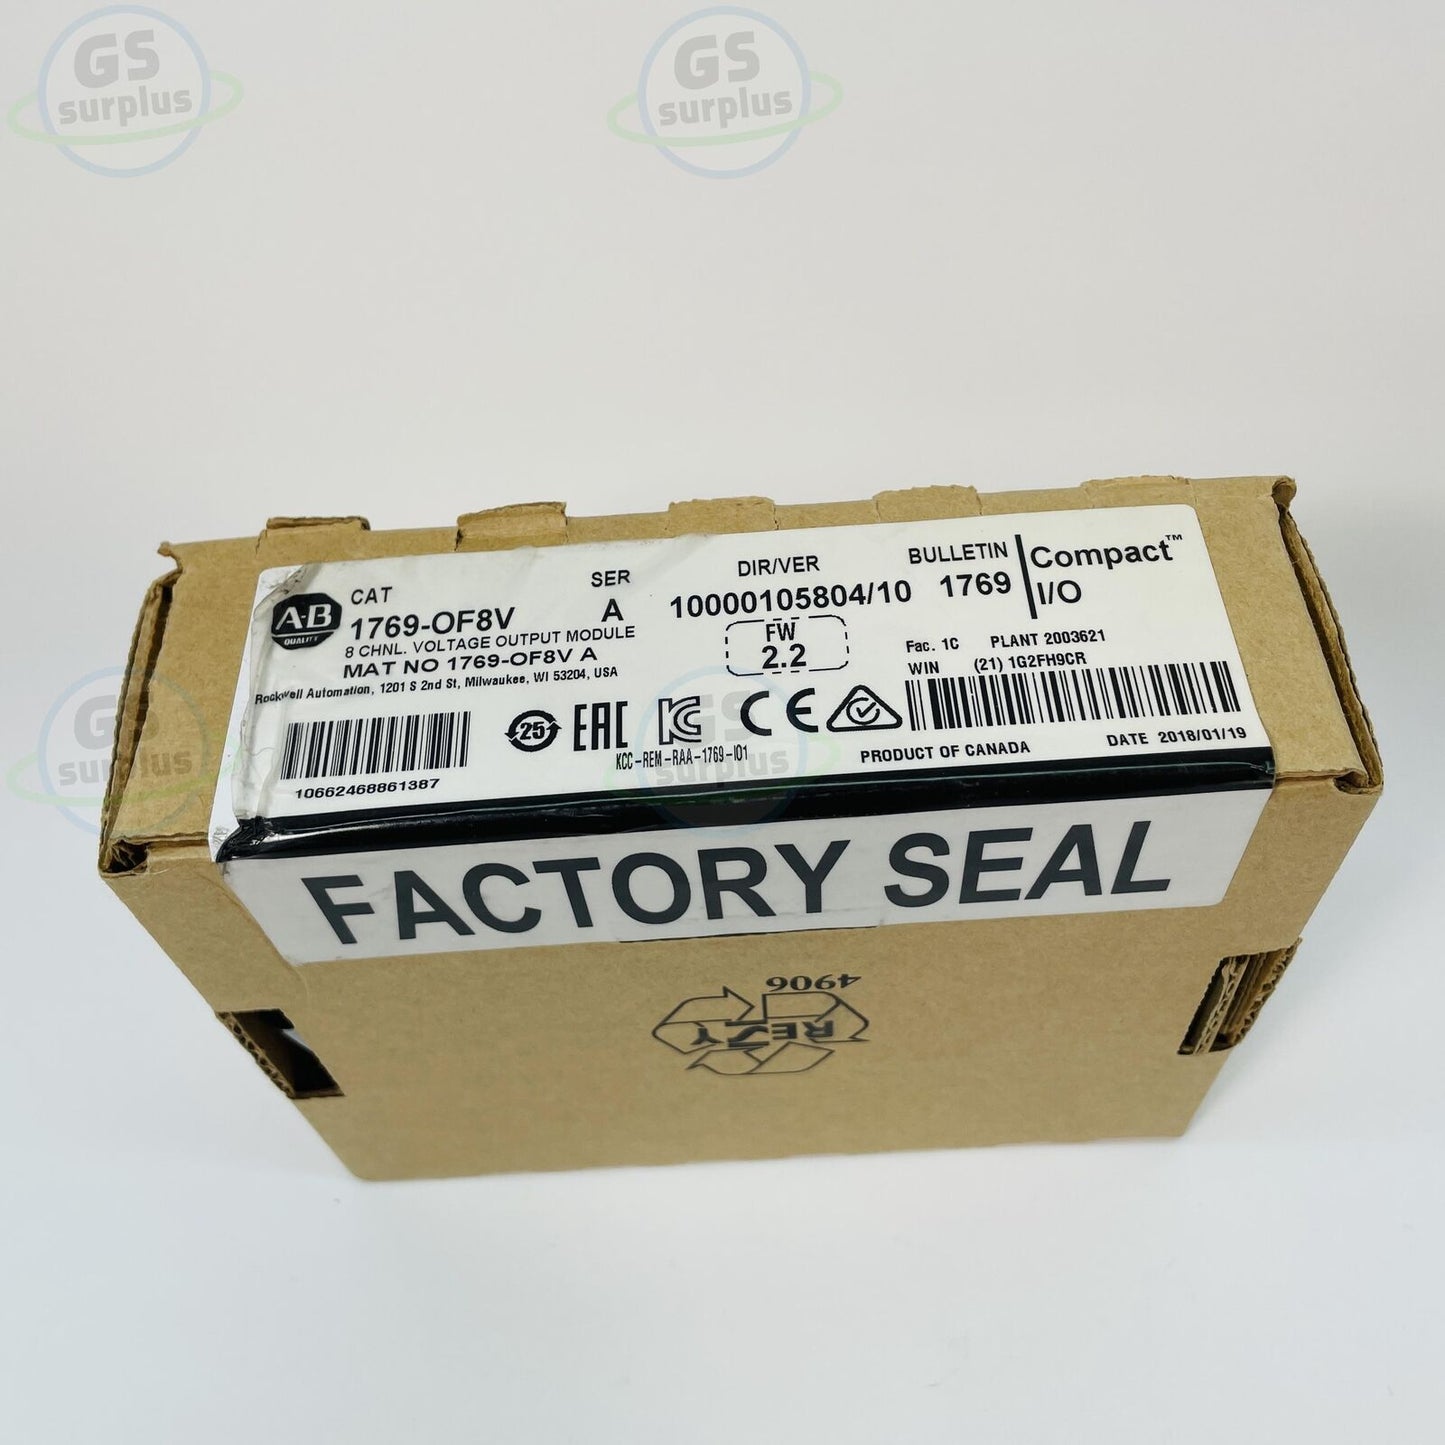 New Sealed ALLEN BRADLEY 1769-OF8V /A 8 Channel Voltage Output Module Compact I/